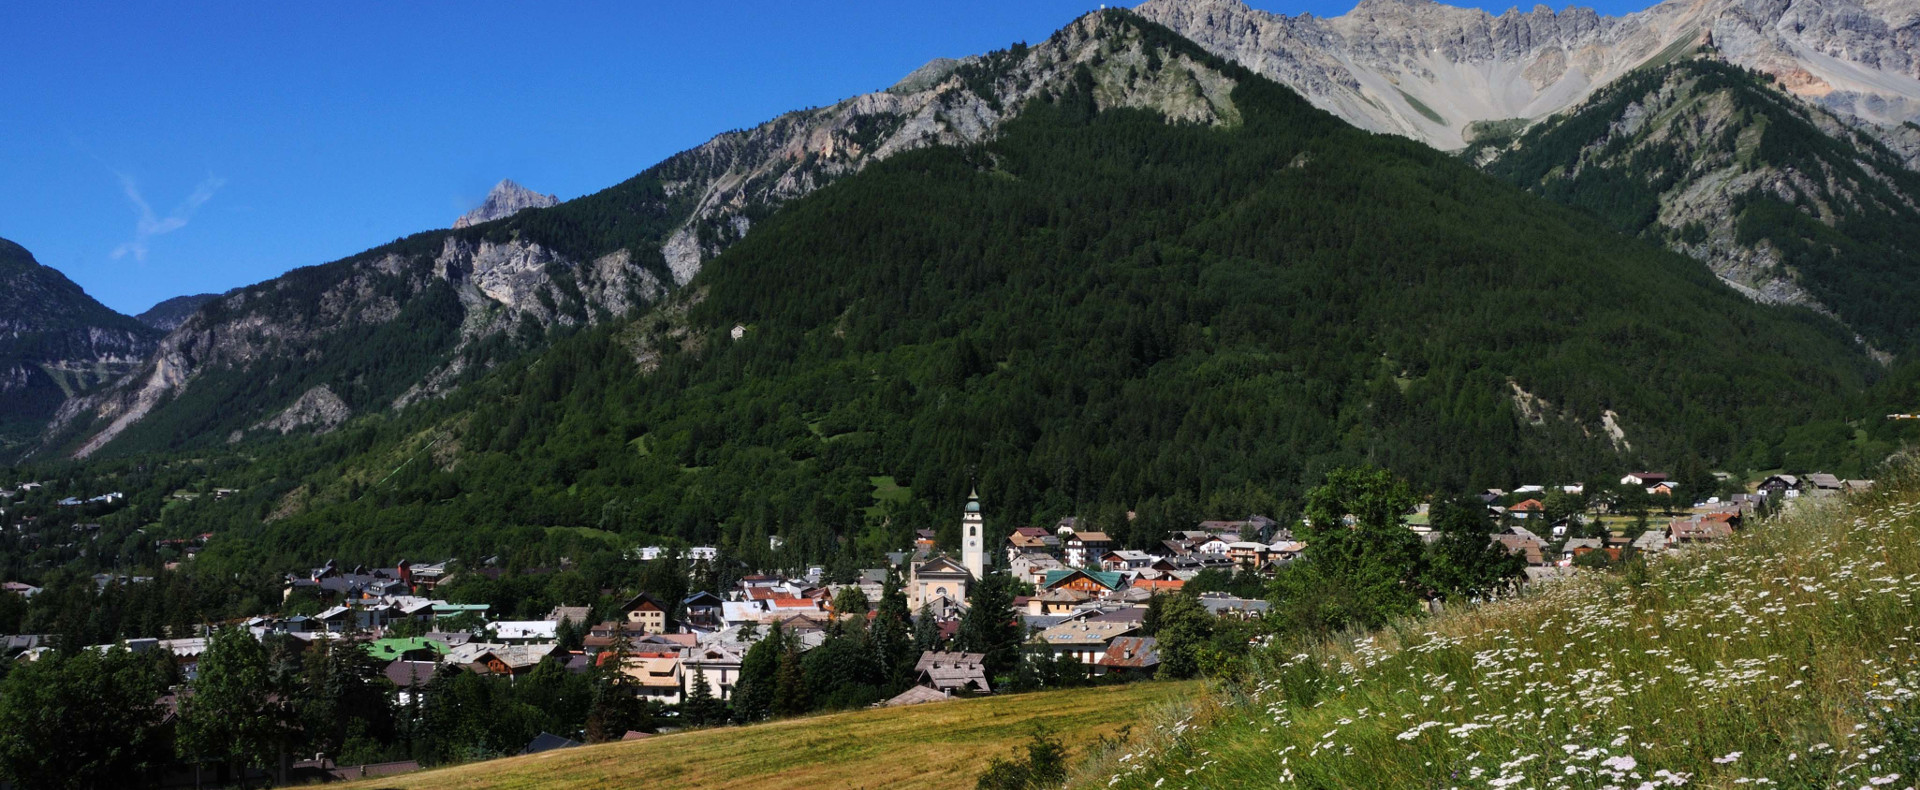 STAY 4 NIGHTS AND PAY JUST 2 - BOOK YOUR HOLIDAY IN BARDONECCHIA !